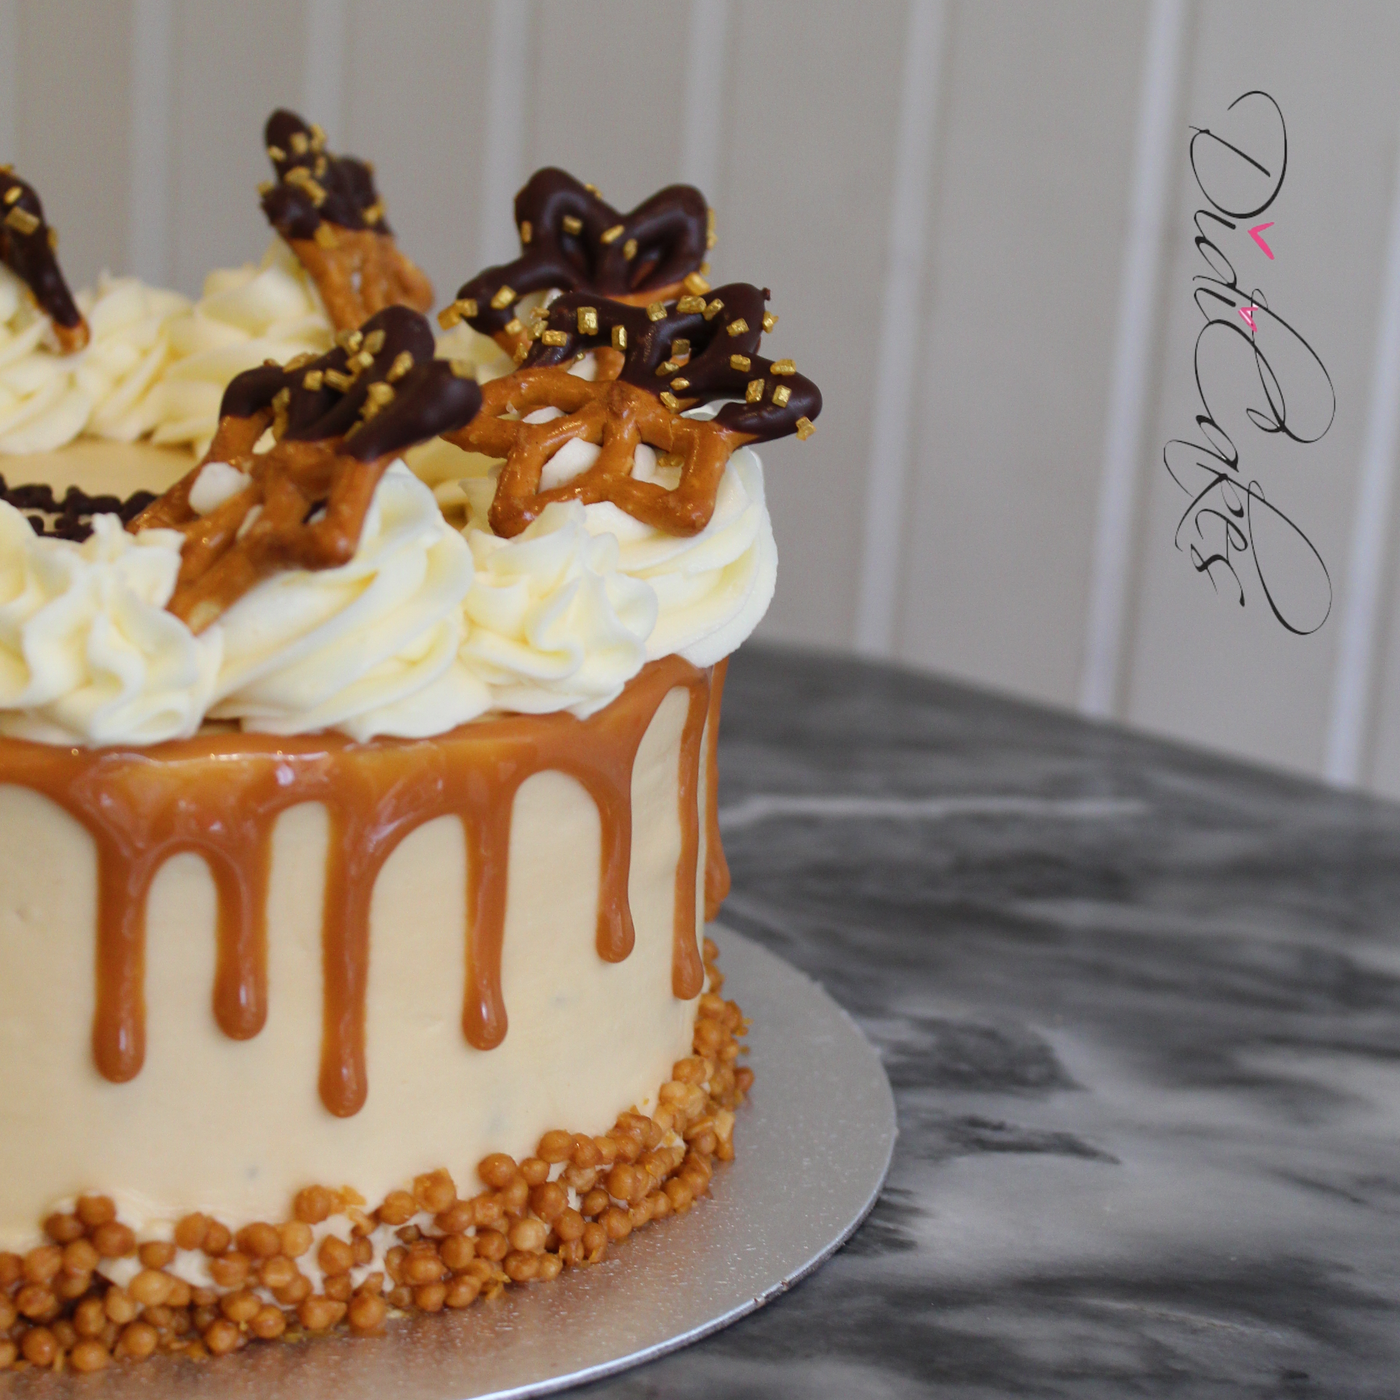 Salted Caramel Cake (NXDY)